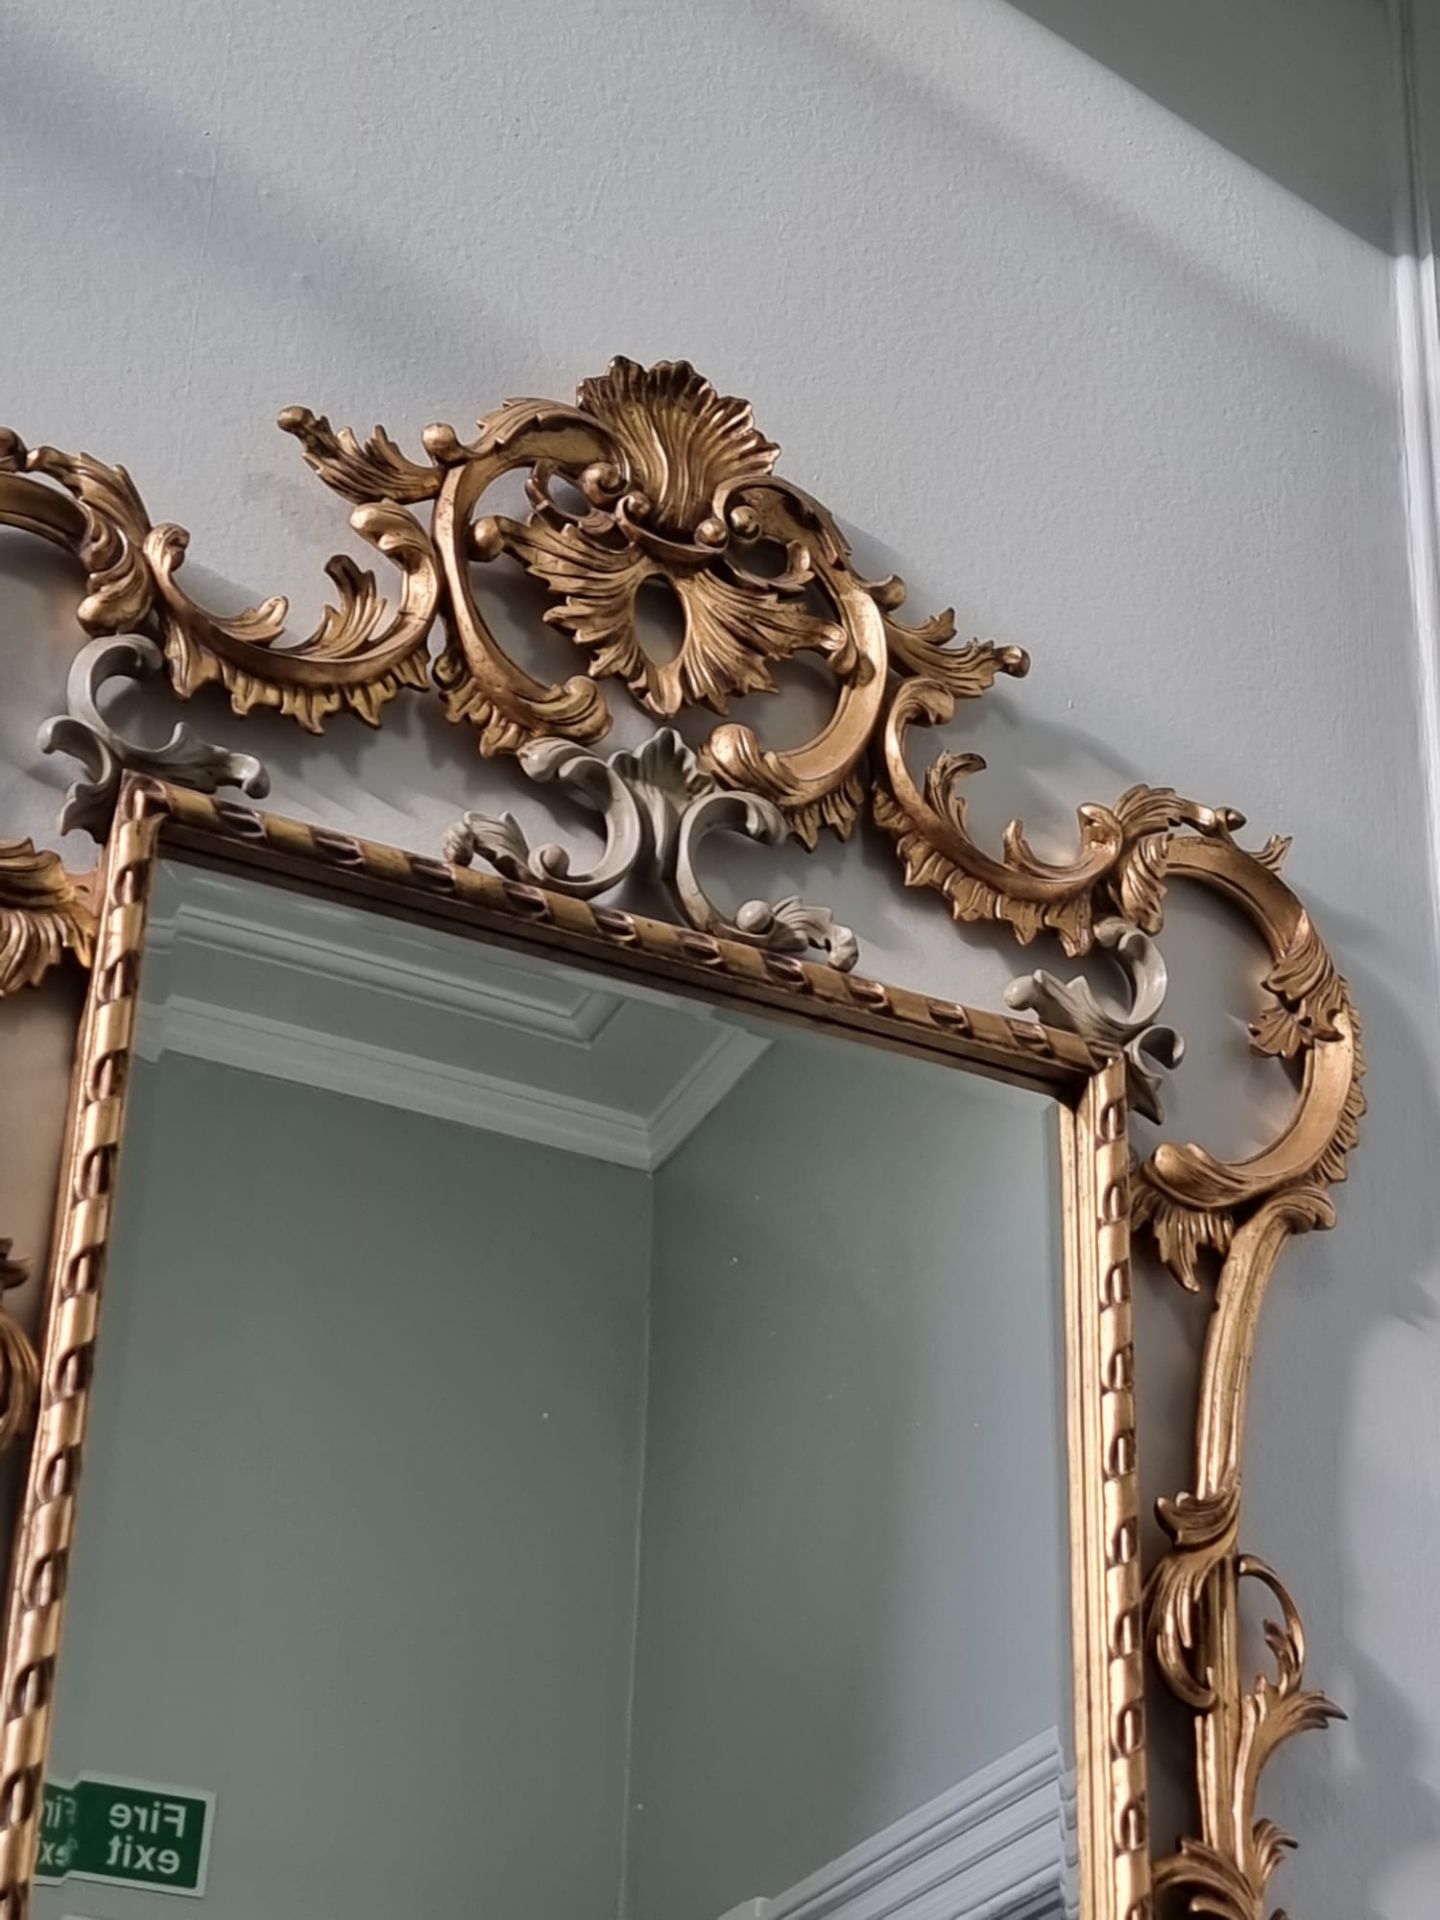 Monumental Louis XV Style Gilt Pier Mirror  Carved And Gilt Overmantle Or Pier Mirror. Original - Image 4 of 5